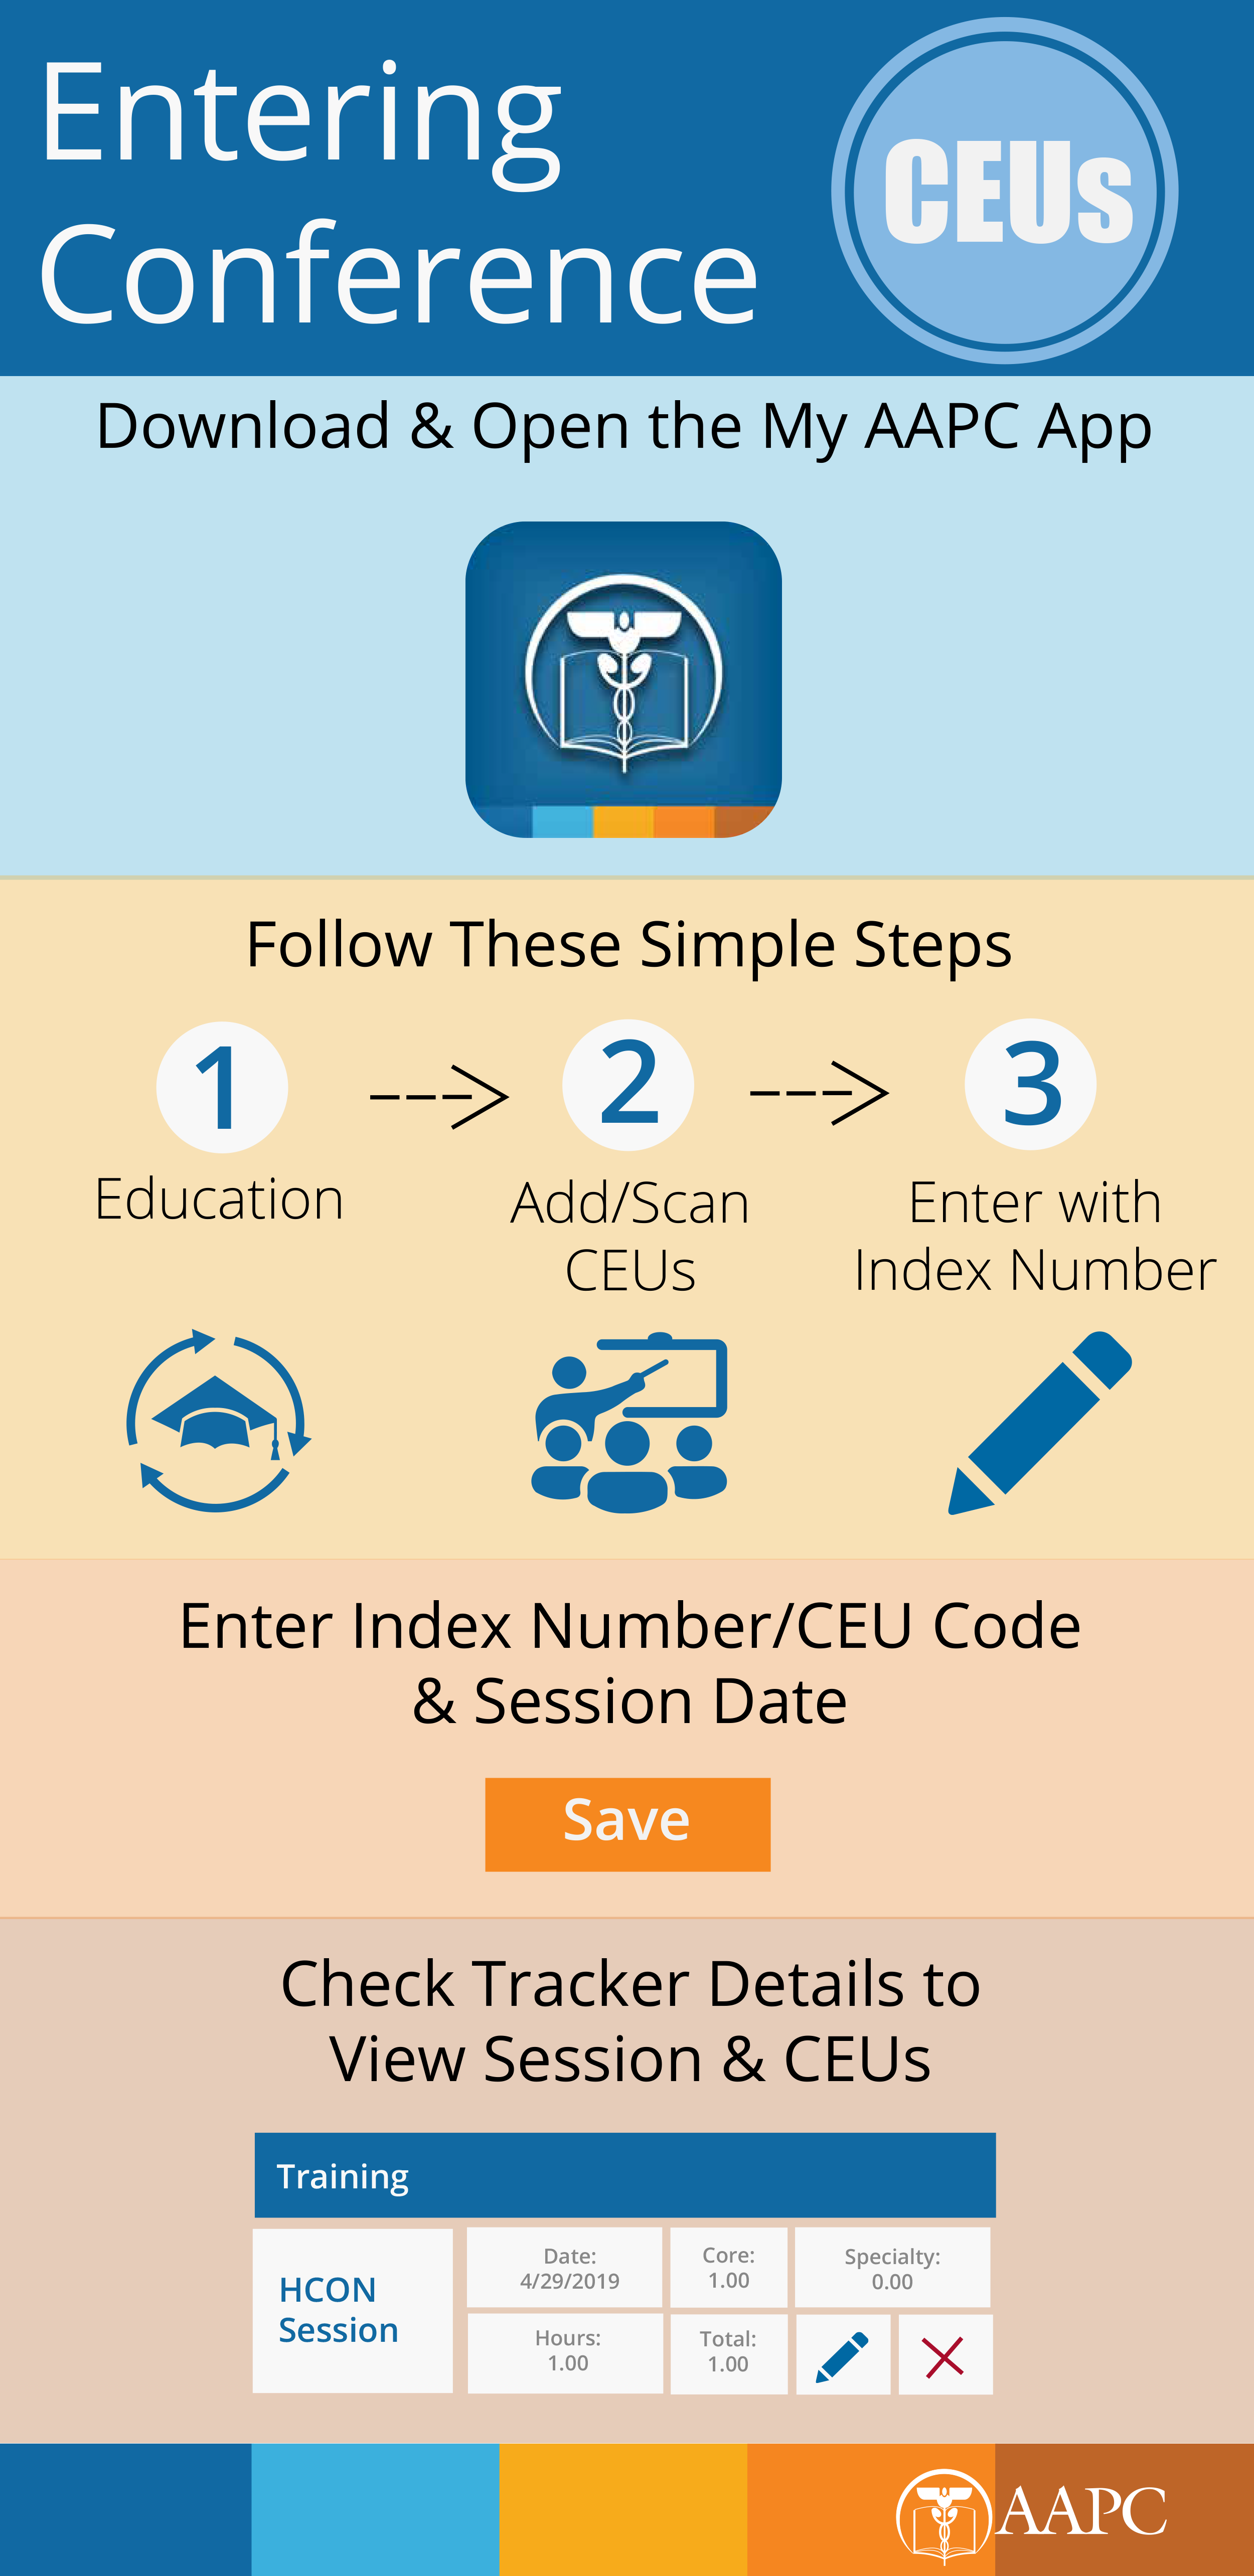 Infographic Entering Conference CEUs AAPC Knowledge Center